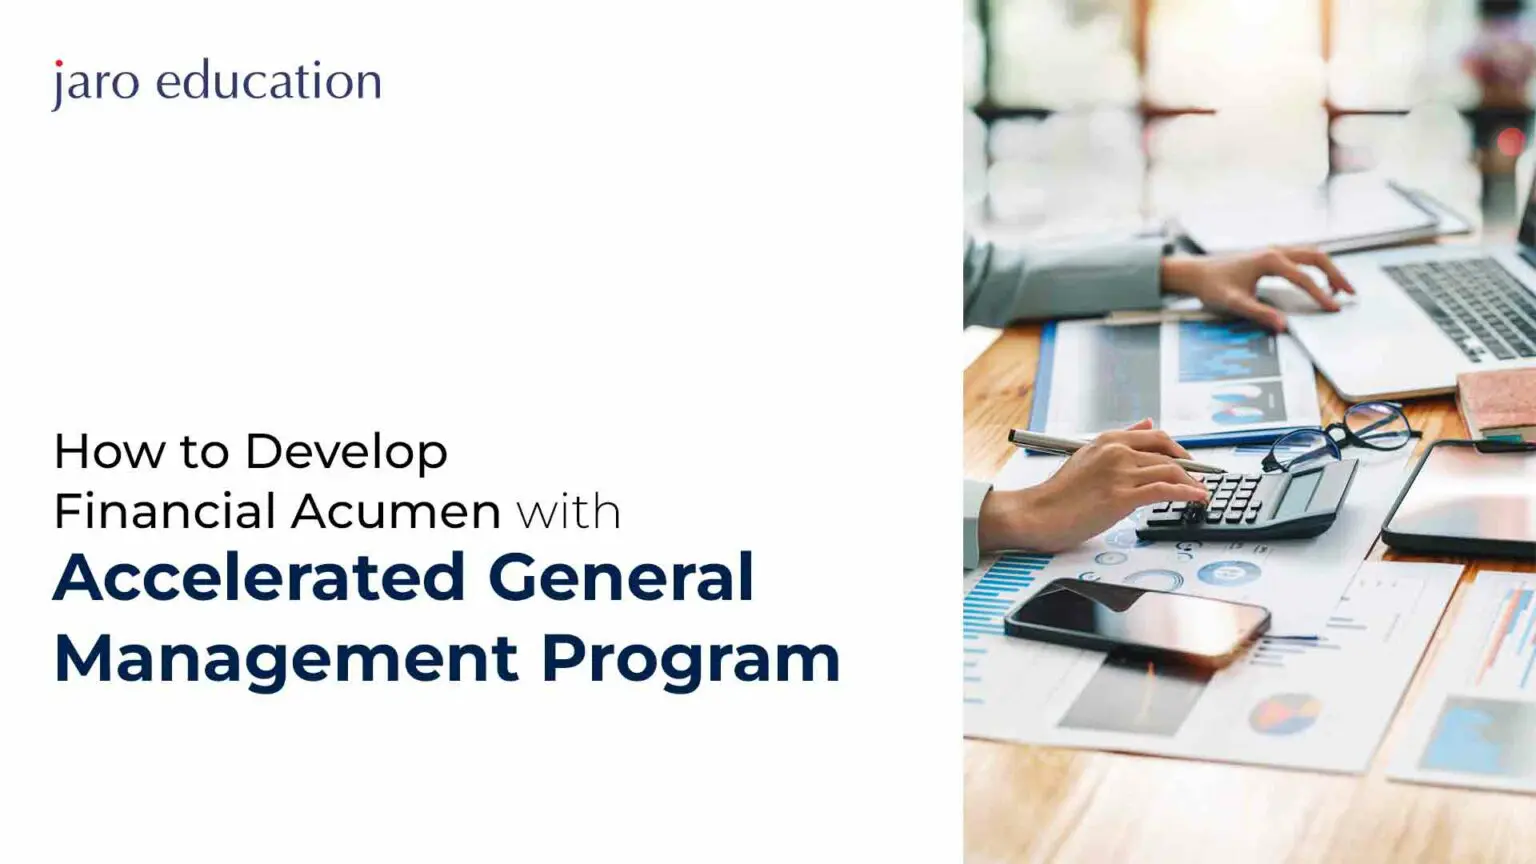 How-to-Develop-Financial-Acumen-with-Accelerated-General-Management-Program